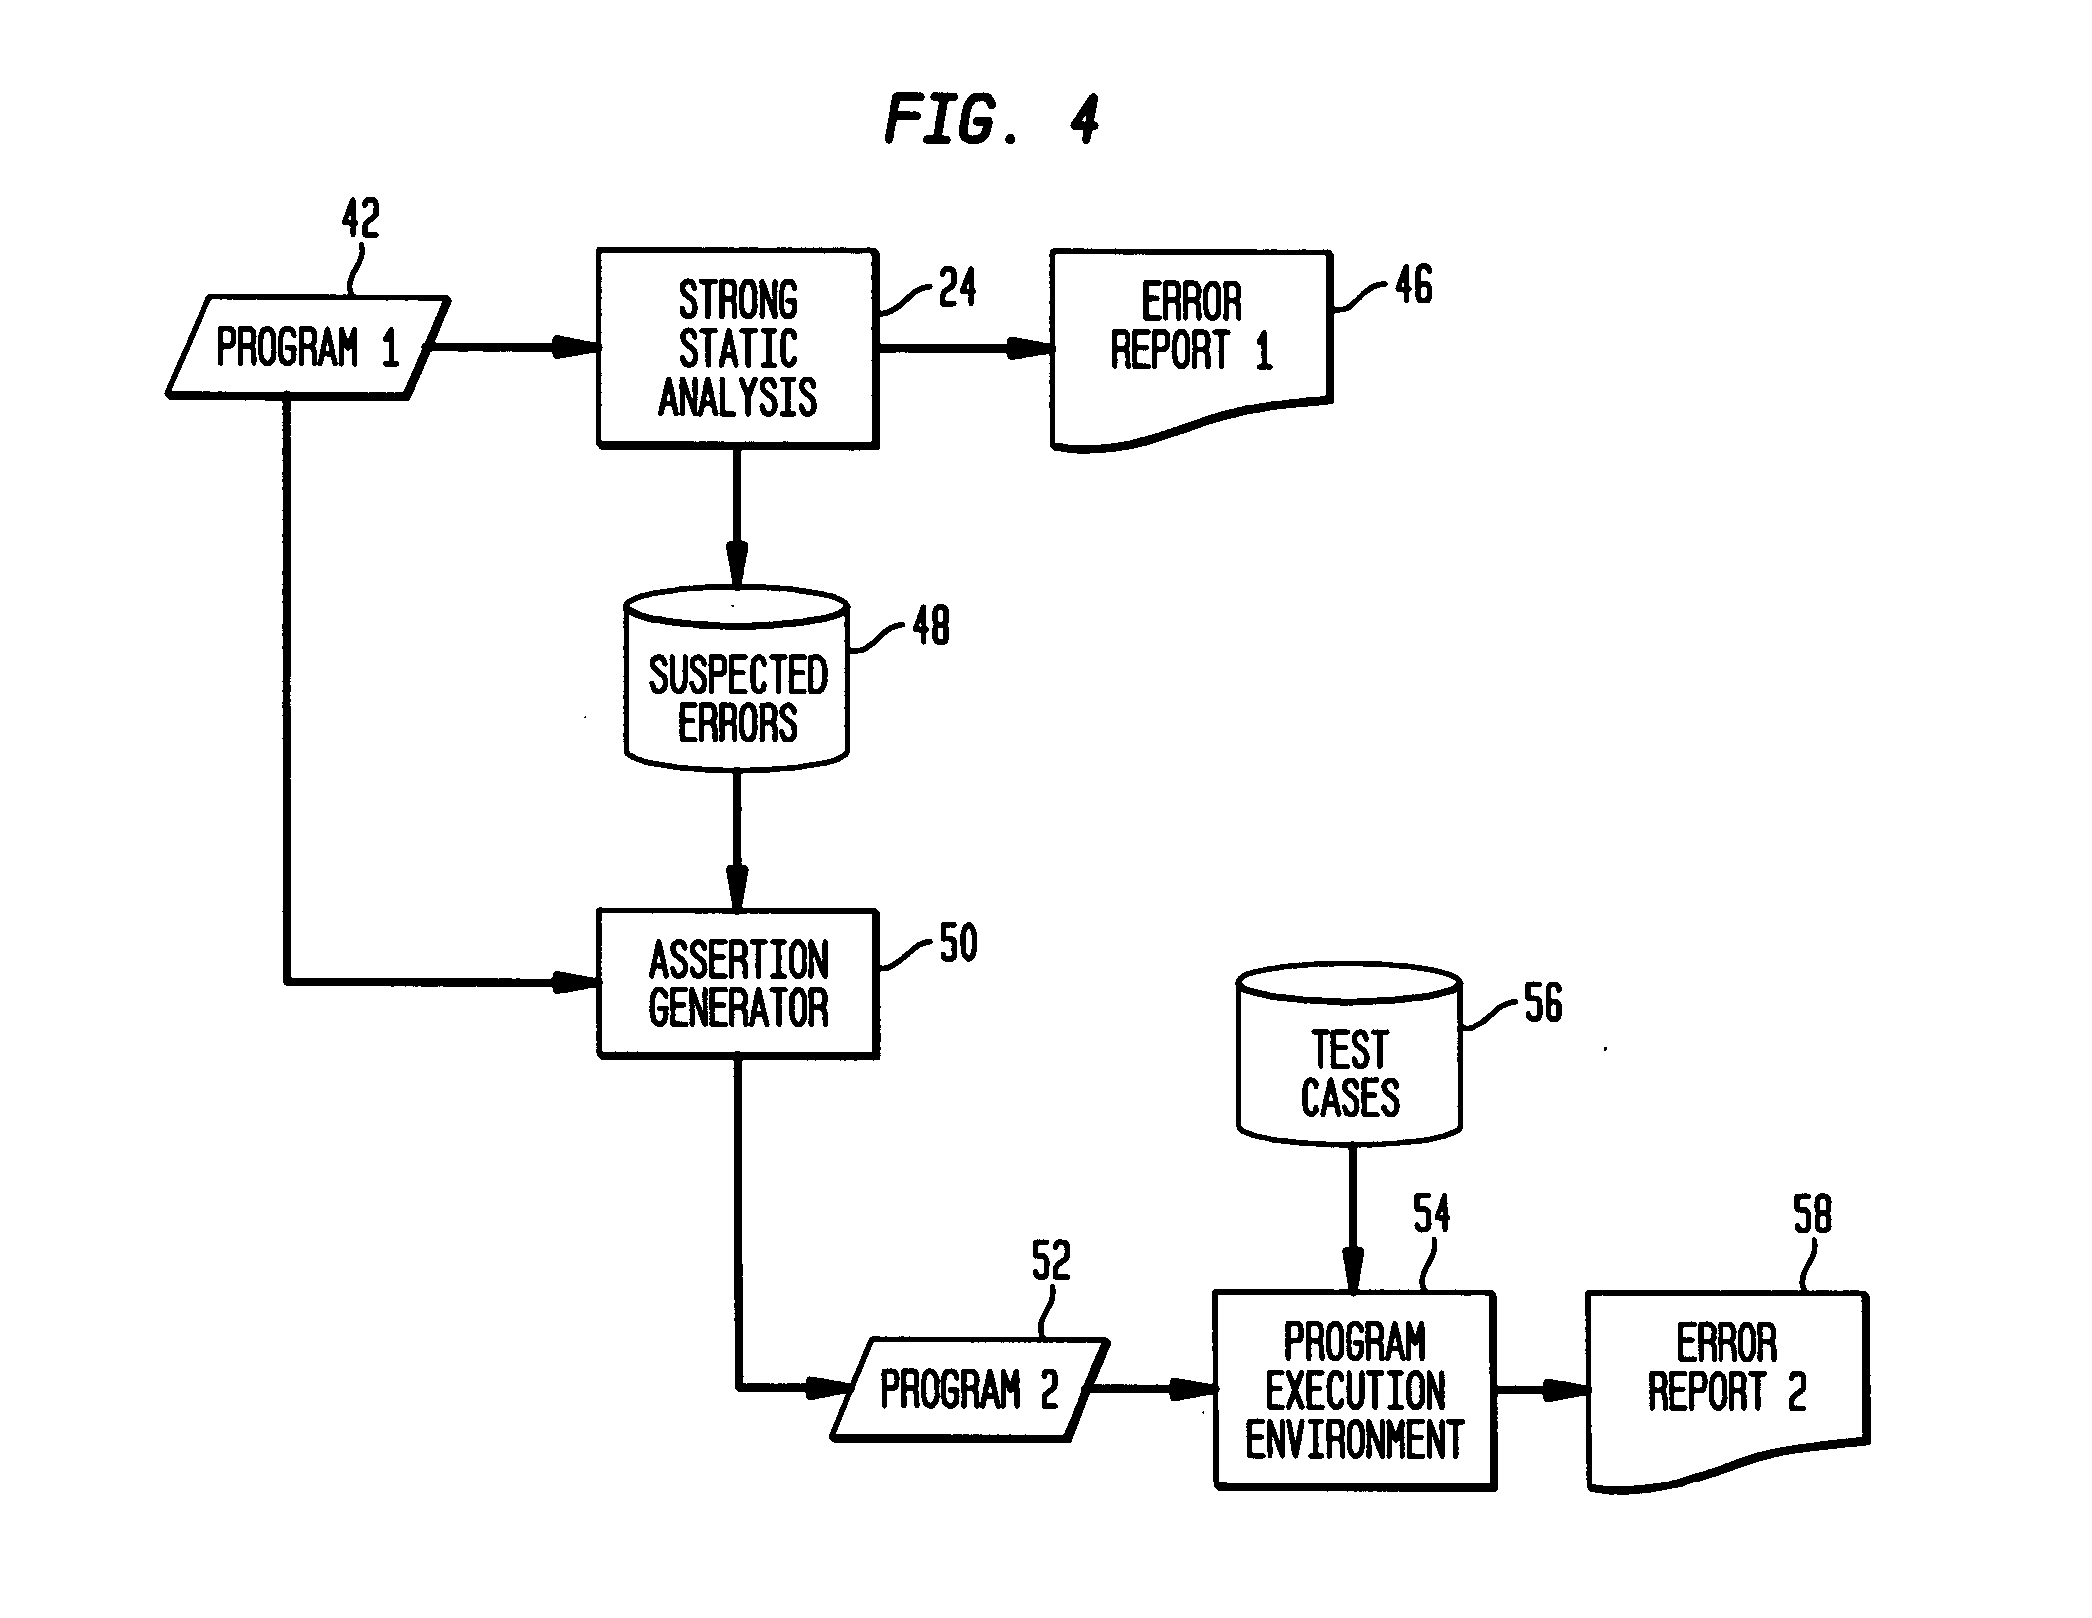 Method and system for identifying errors in computer software